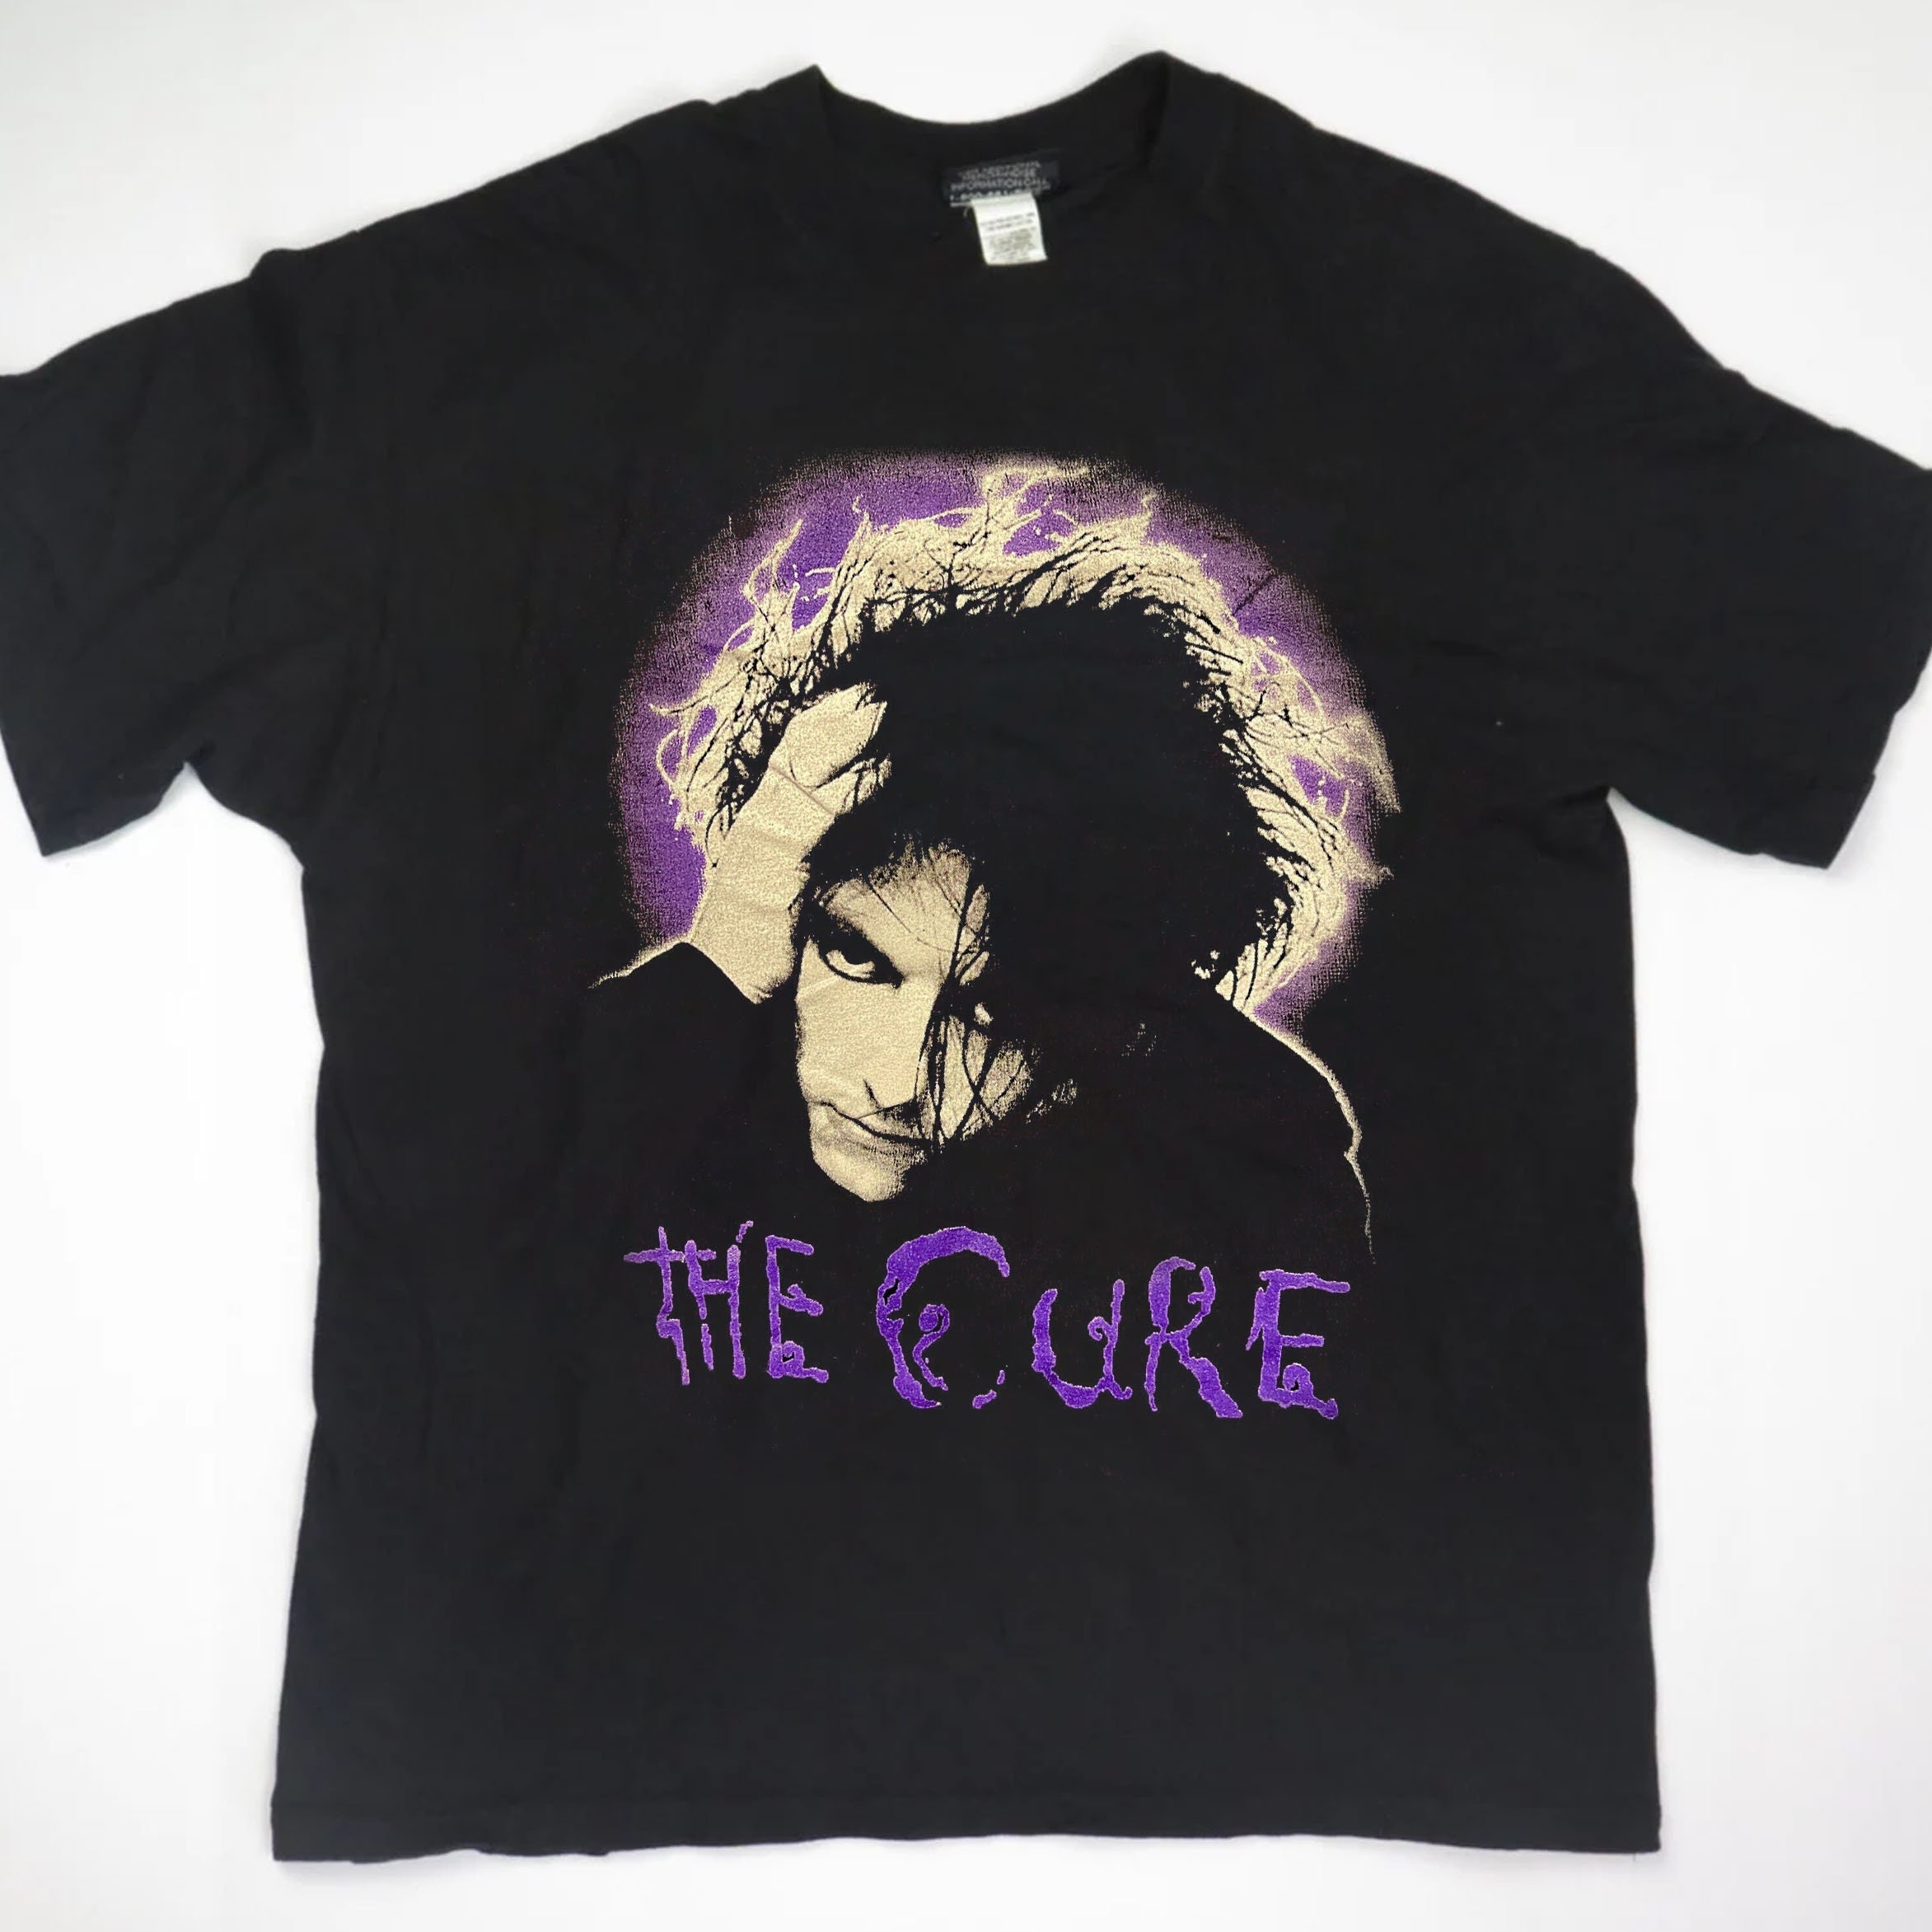 Discover The Cure Robert Smith Vintage 90s shirt